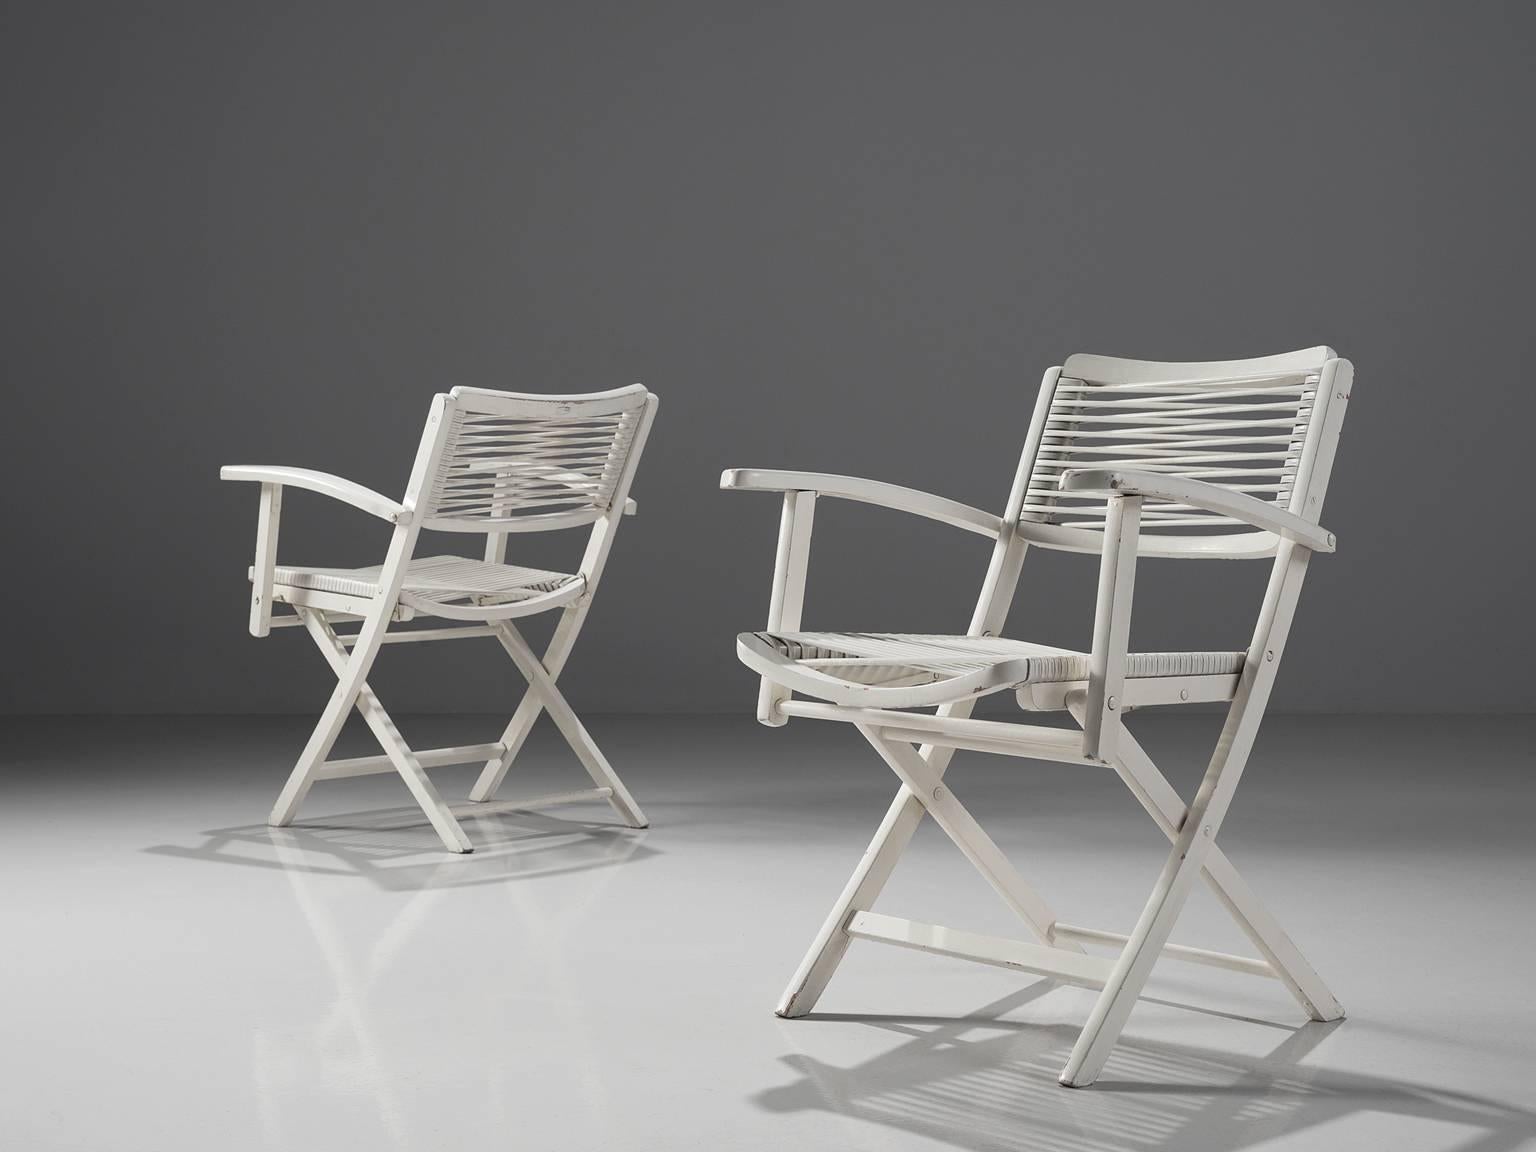 Chairs, white painted wood, Europe, 1960s.

These armchairs are made from wood that has been painted white. The seat and backrest is made of strings. Due to the use of this flexible material the chairs are comfortable as they adjust to the sitters